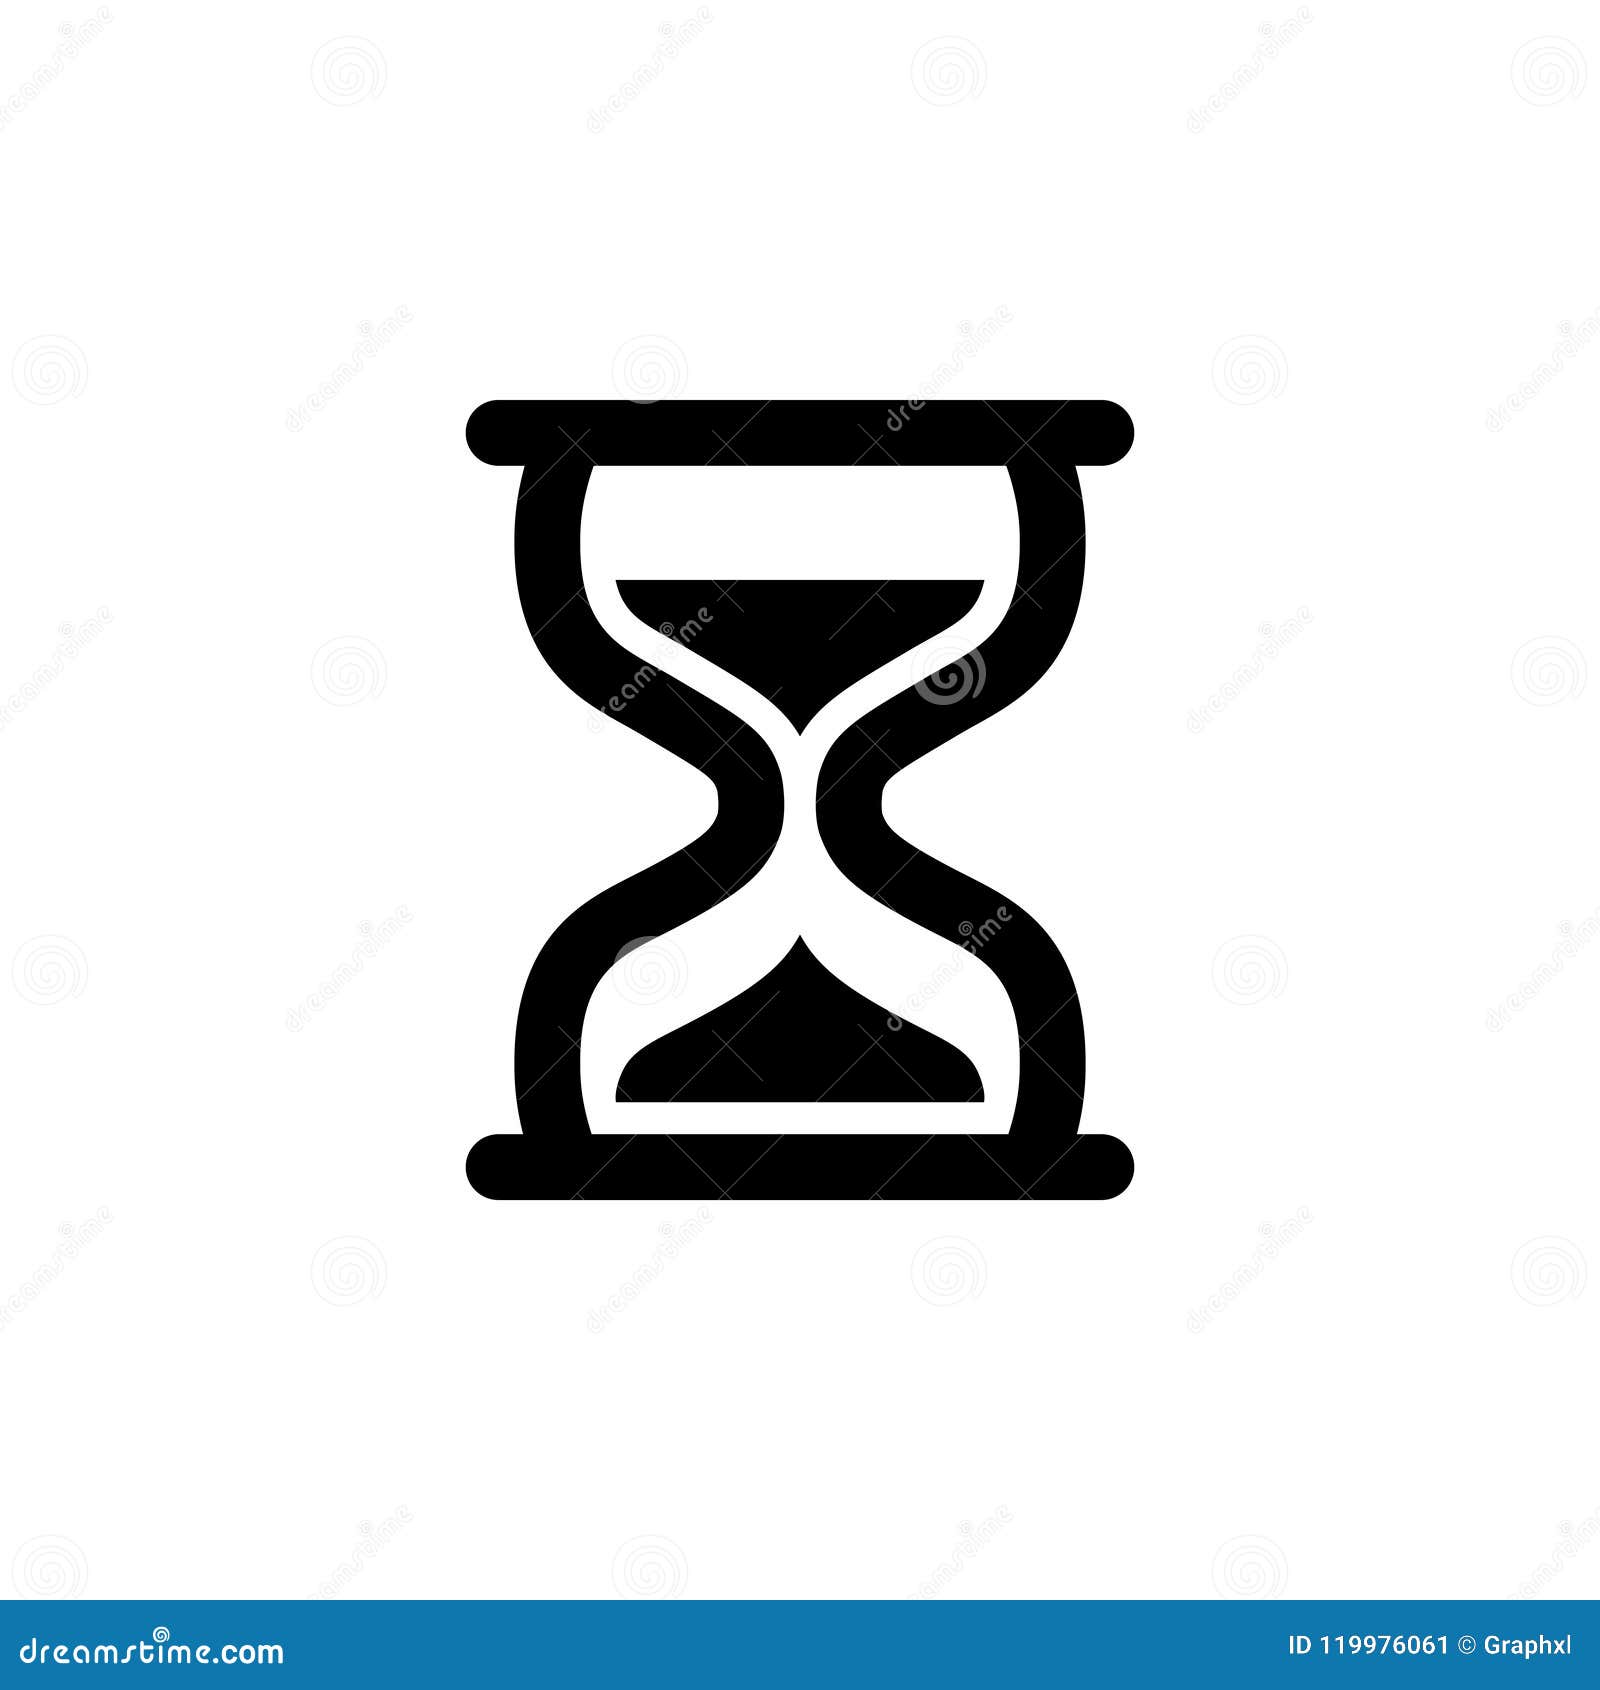 hour glass icon. variant no. 2